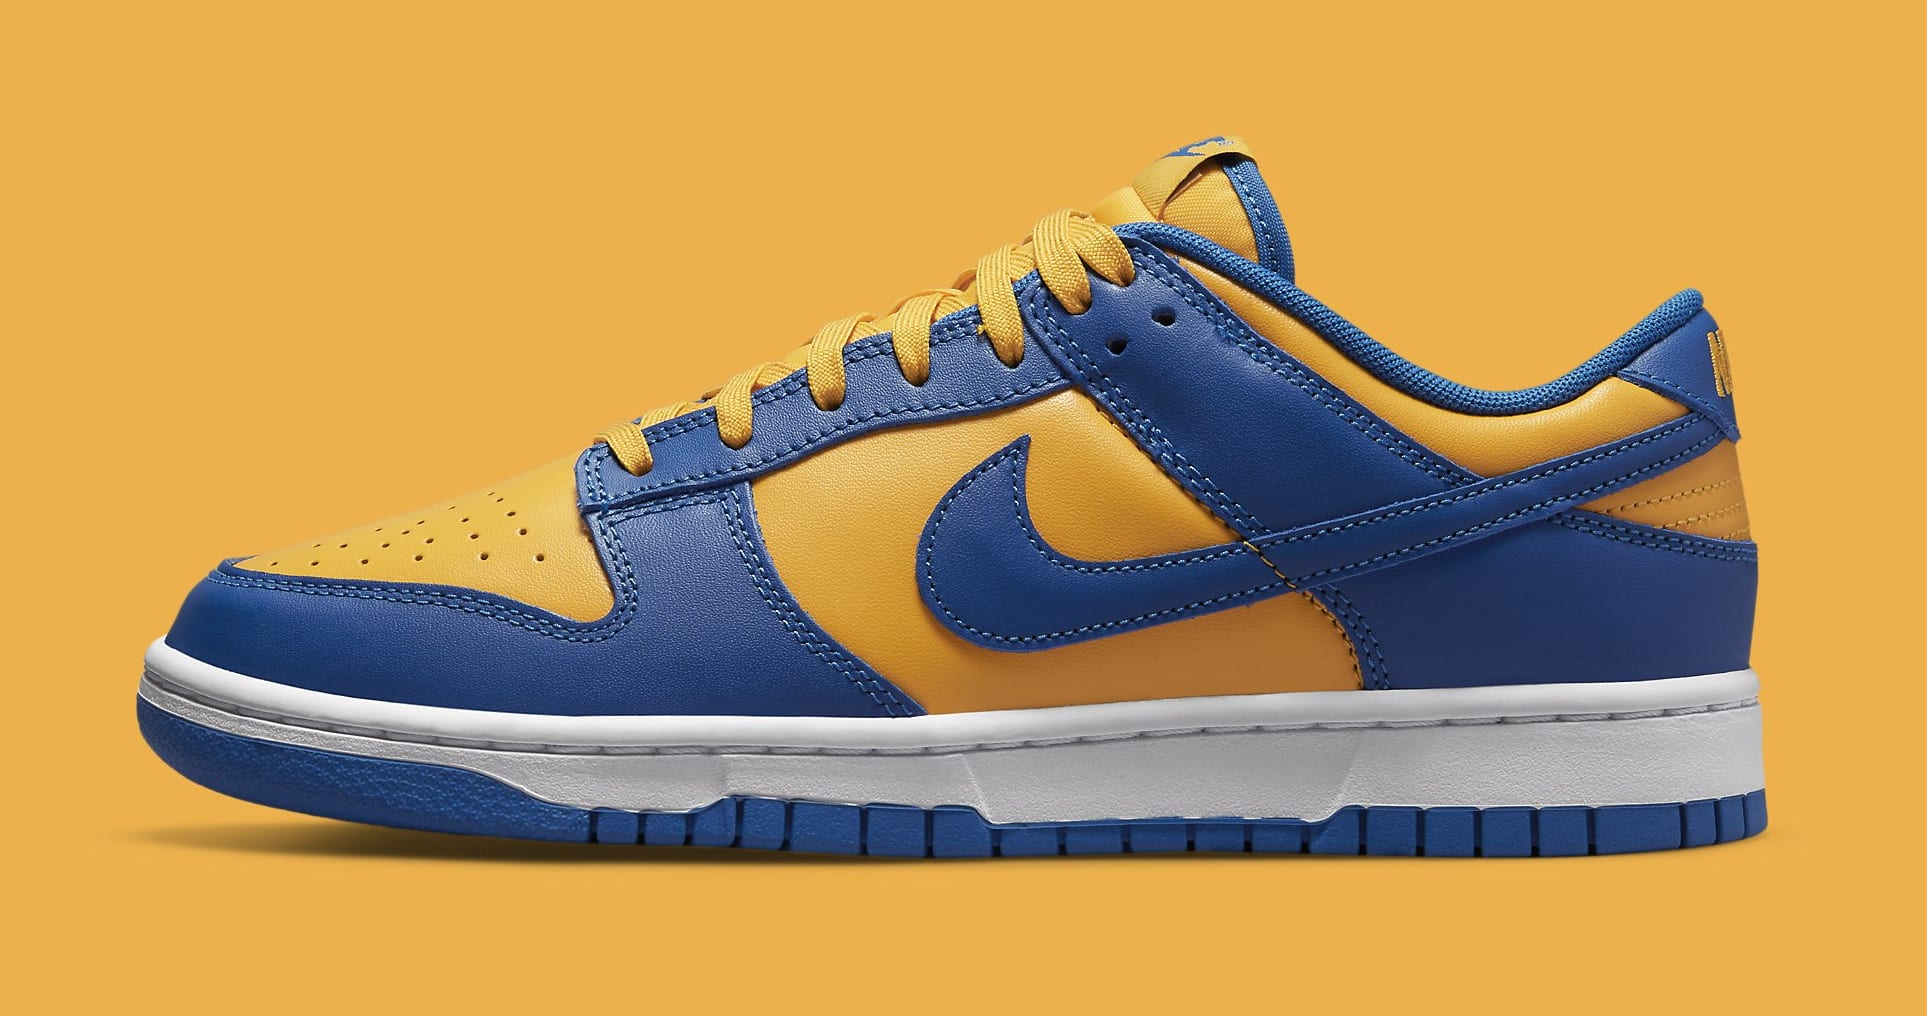 UCLA-Inspired Nike Dunks Get a US Release Date | Complex